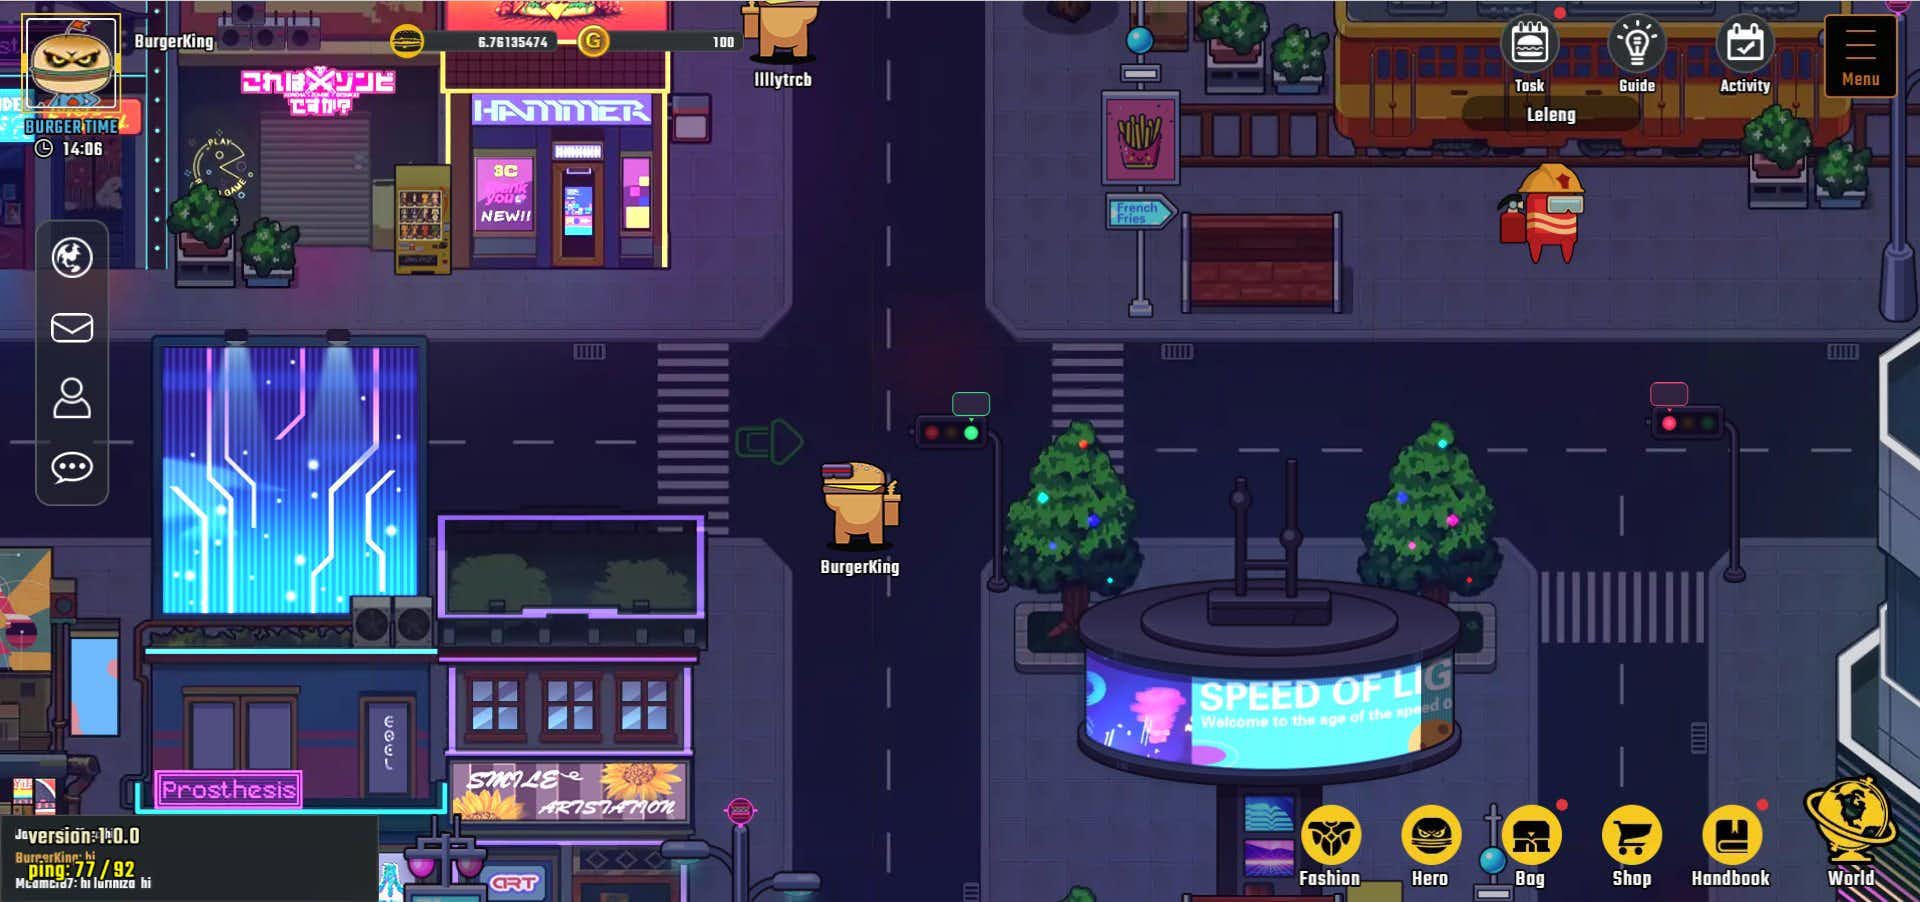 game image from BurgerCities